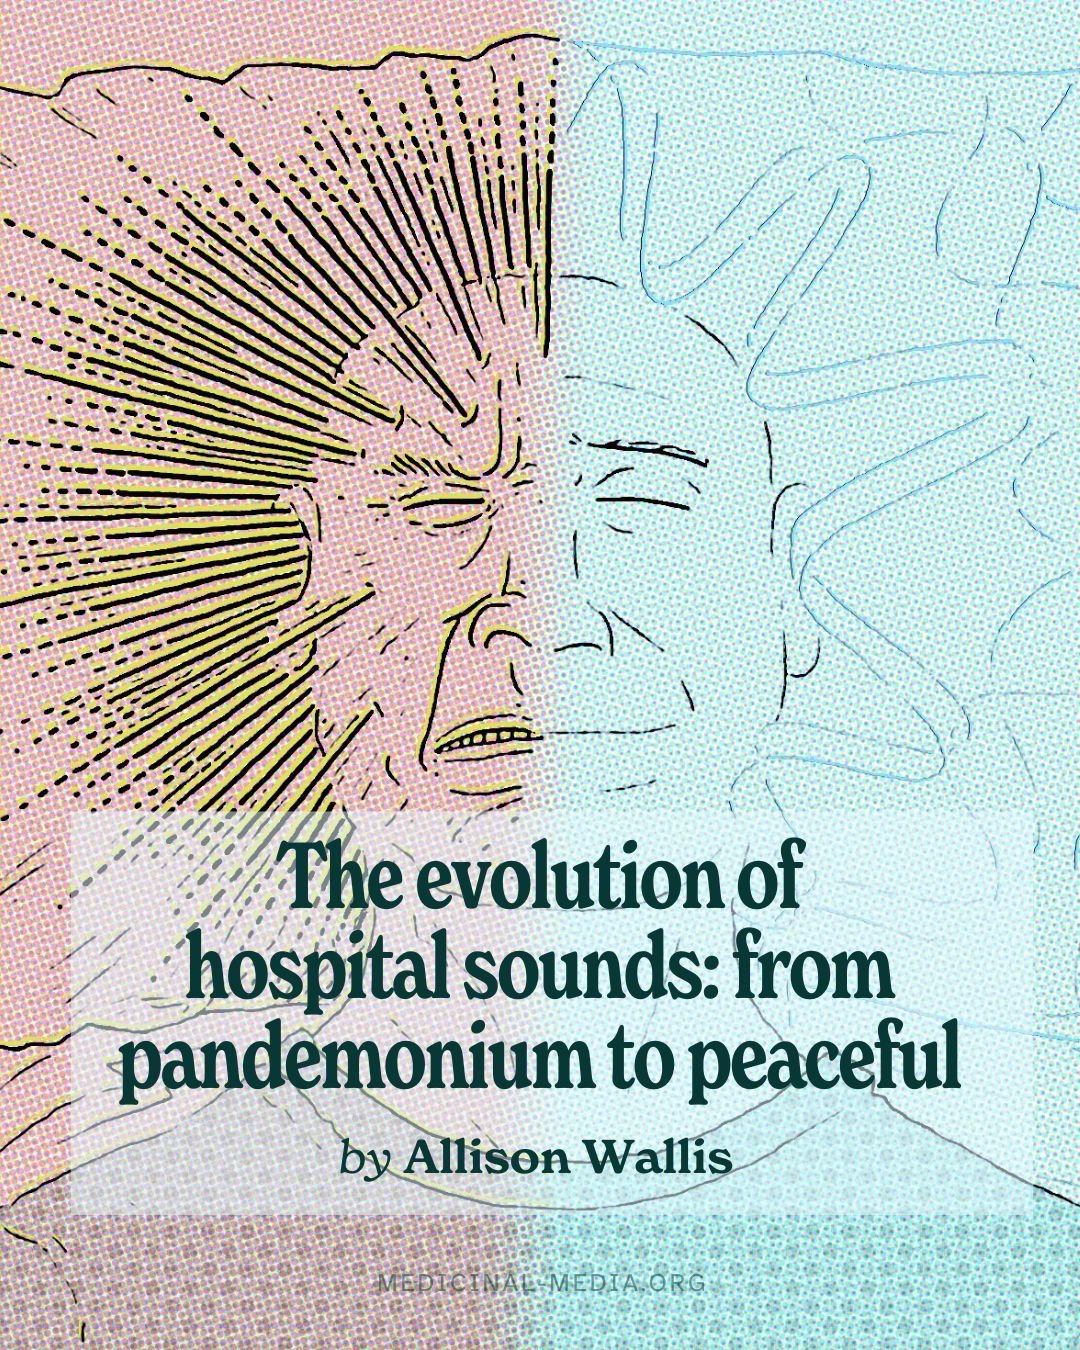 Hospitals are transforming chaotic environments to peaceful healing spaces using the power of sound. In this story from our archives, writer Allison Wallis uncovers how musicians, scientists, and doctors are collaborating to evolve hospital soundscap